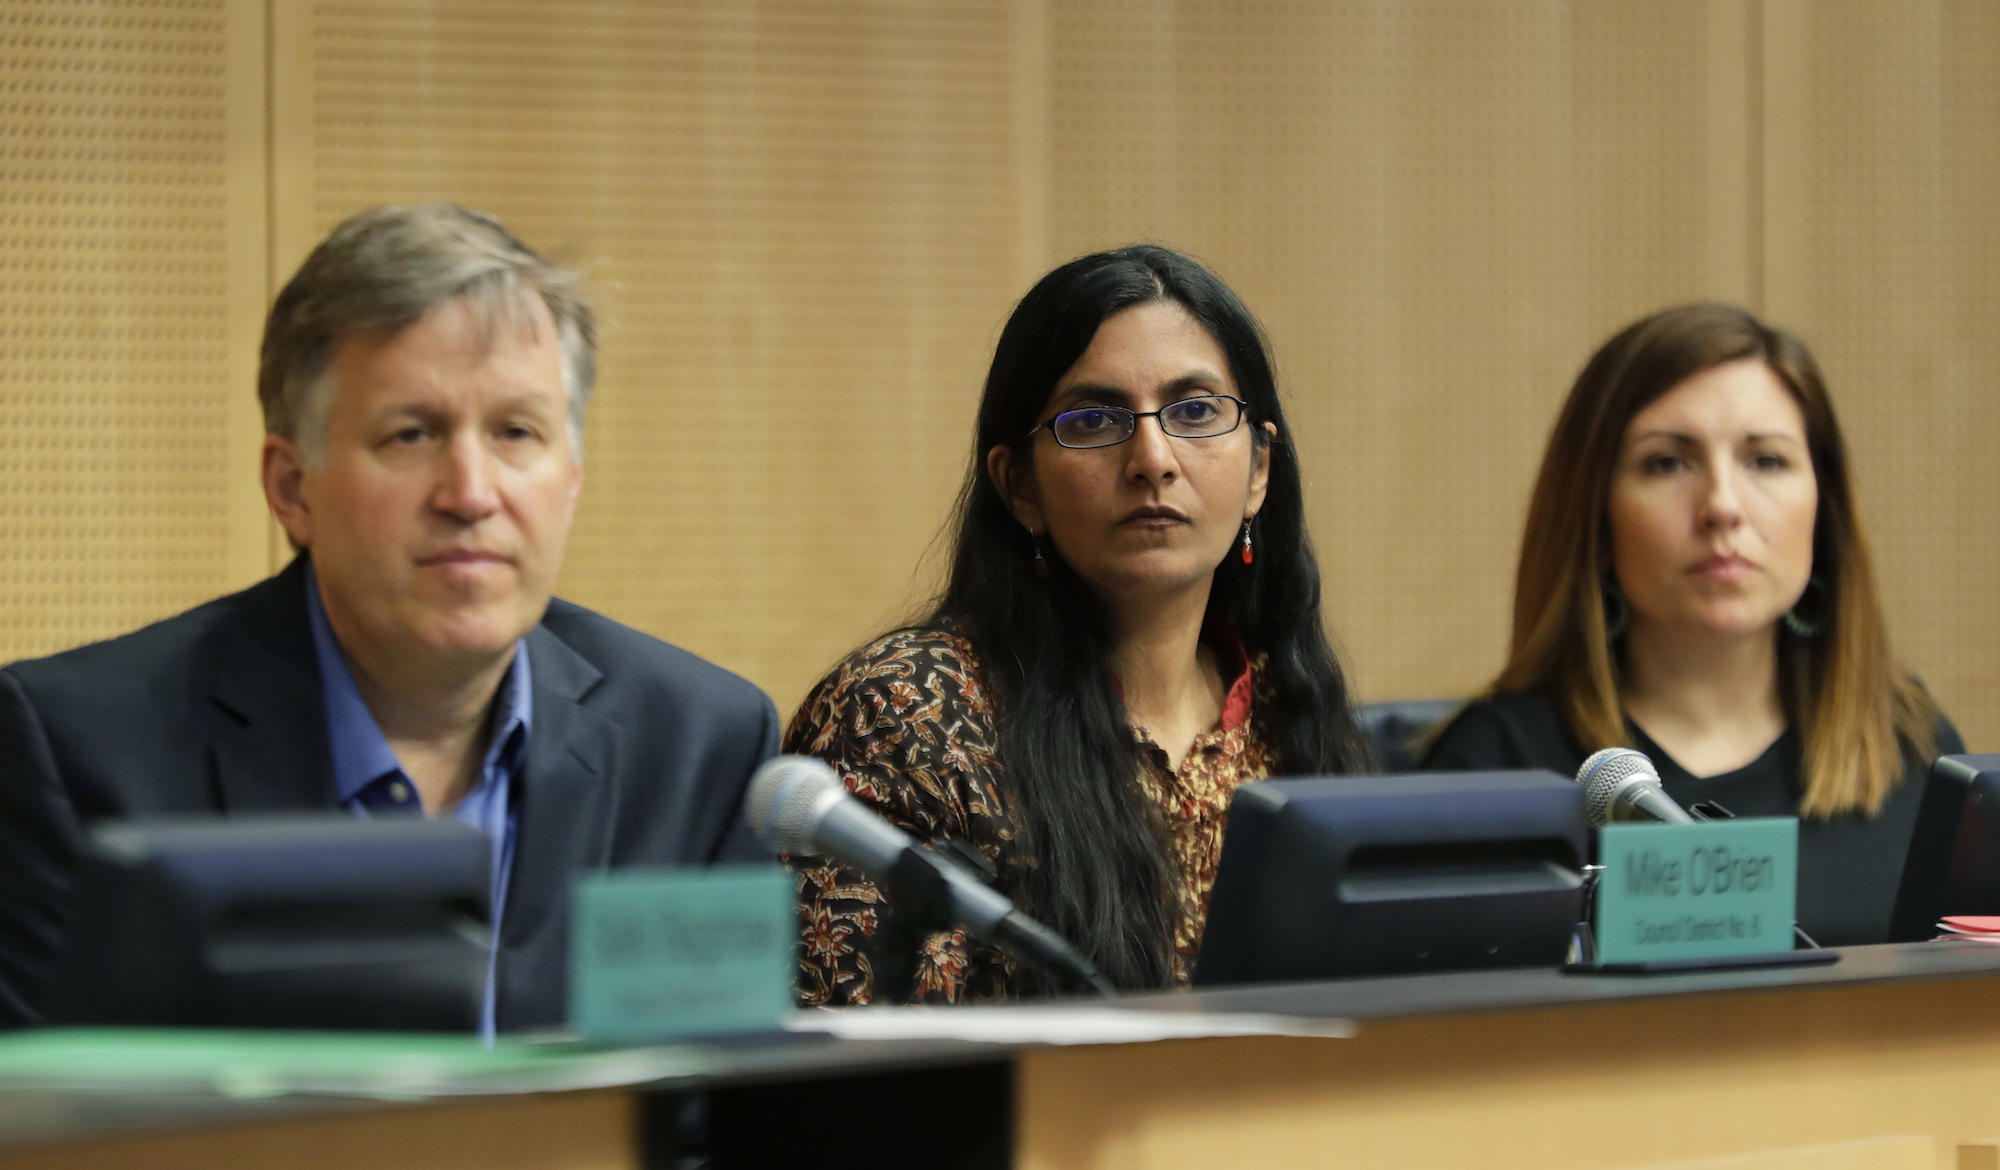 City councilmembers Mike O'Brien, Kshama Sawant and Teresa Mosqueda listen to comments on a proposed tax during a committee meeting at City Hall on May 9.